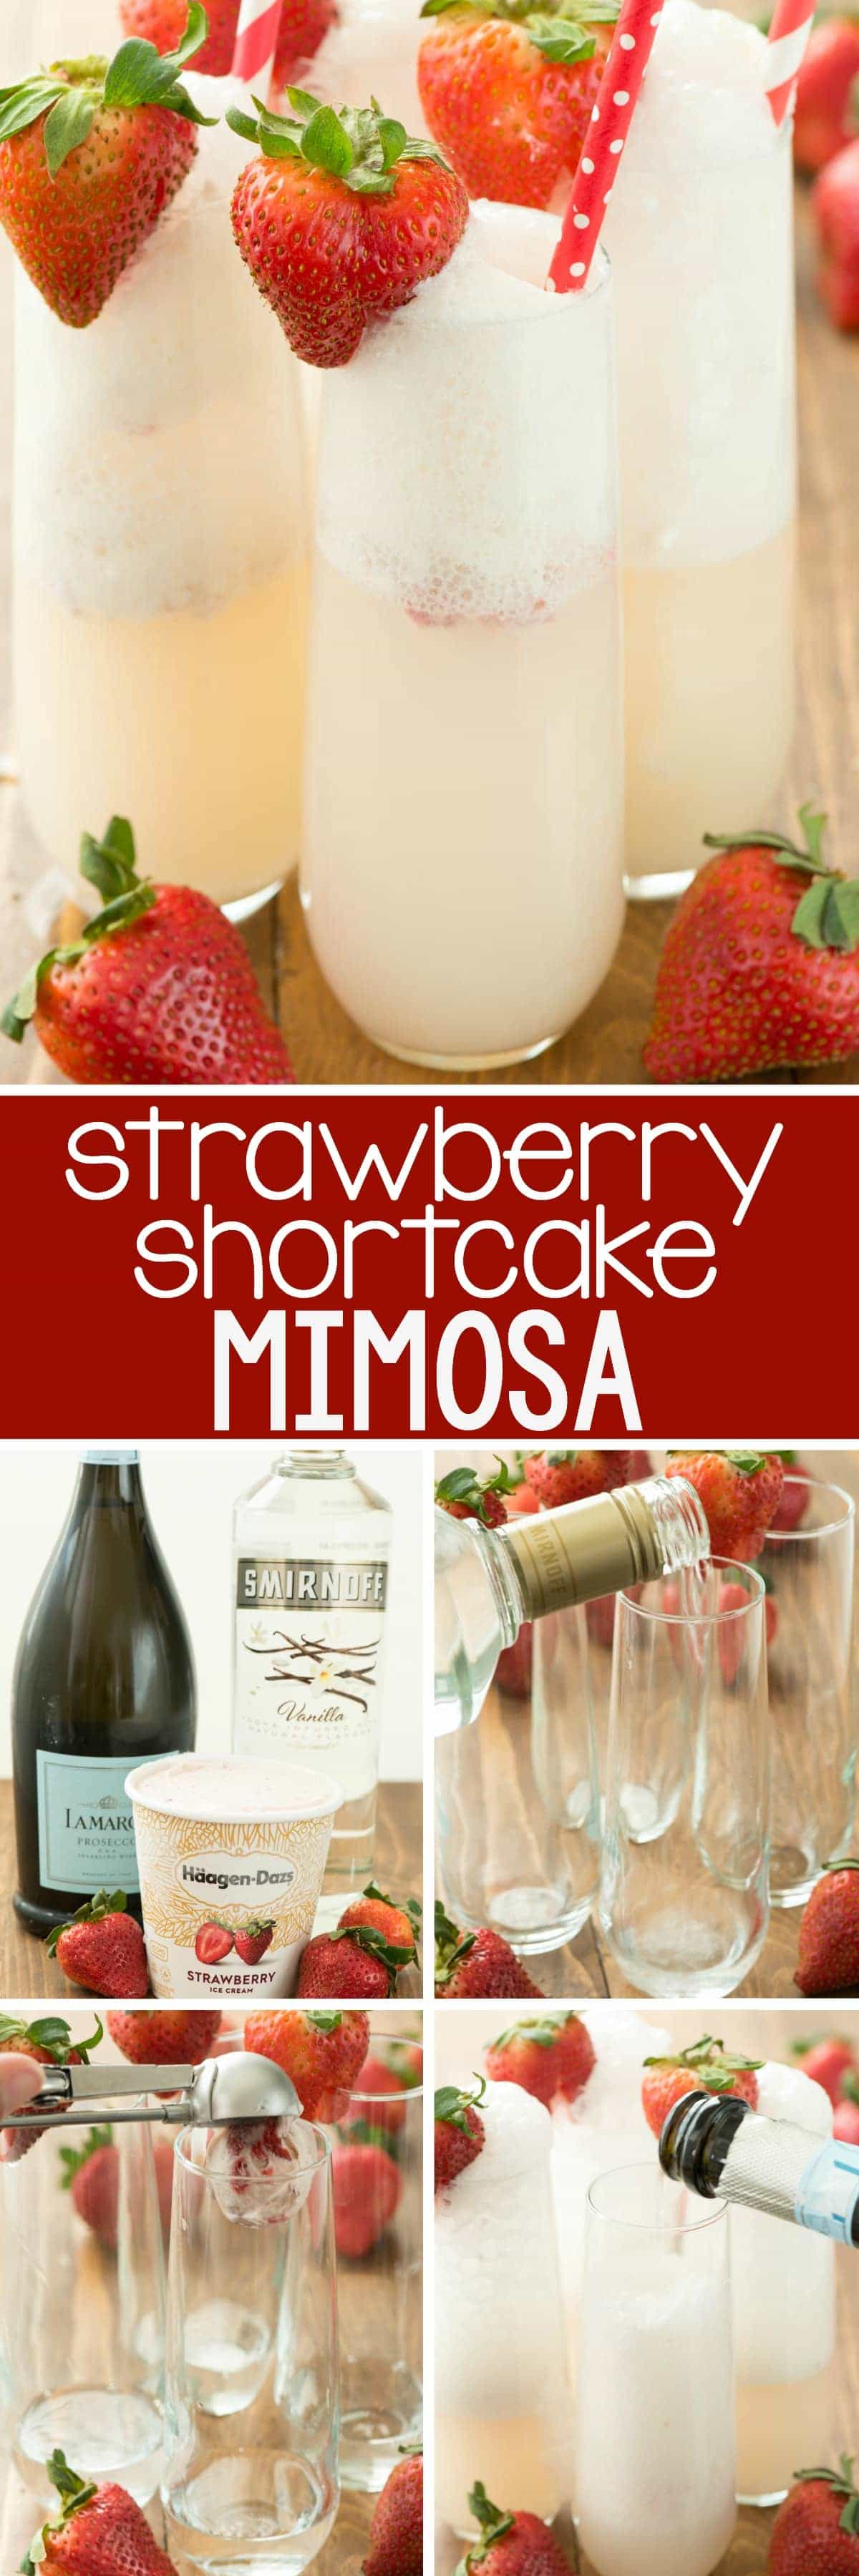 Strawberry Shortcake Mimosa - just three ingredients to the prettiest mimosa recipe ever! This champagne cocktail is perfect for brunch and can be made as a single cocktail or as a punch!